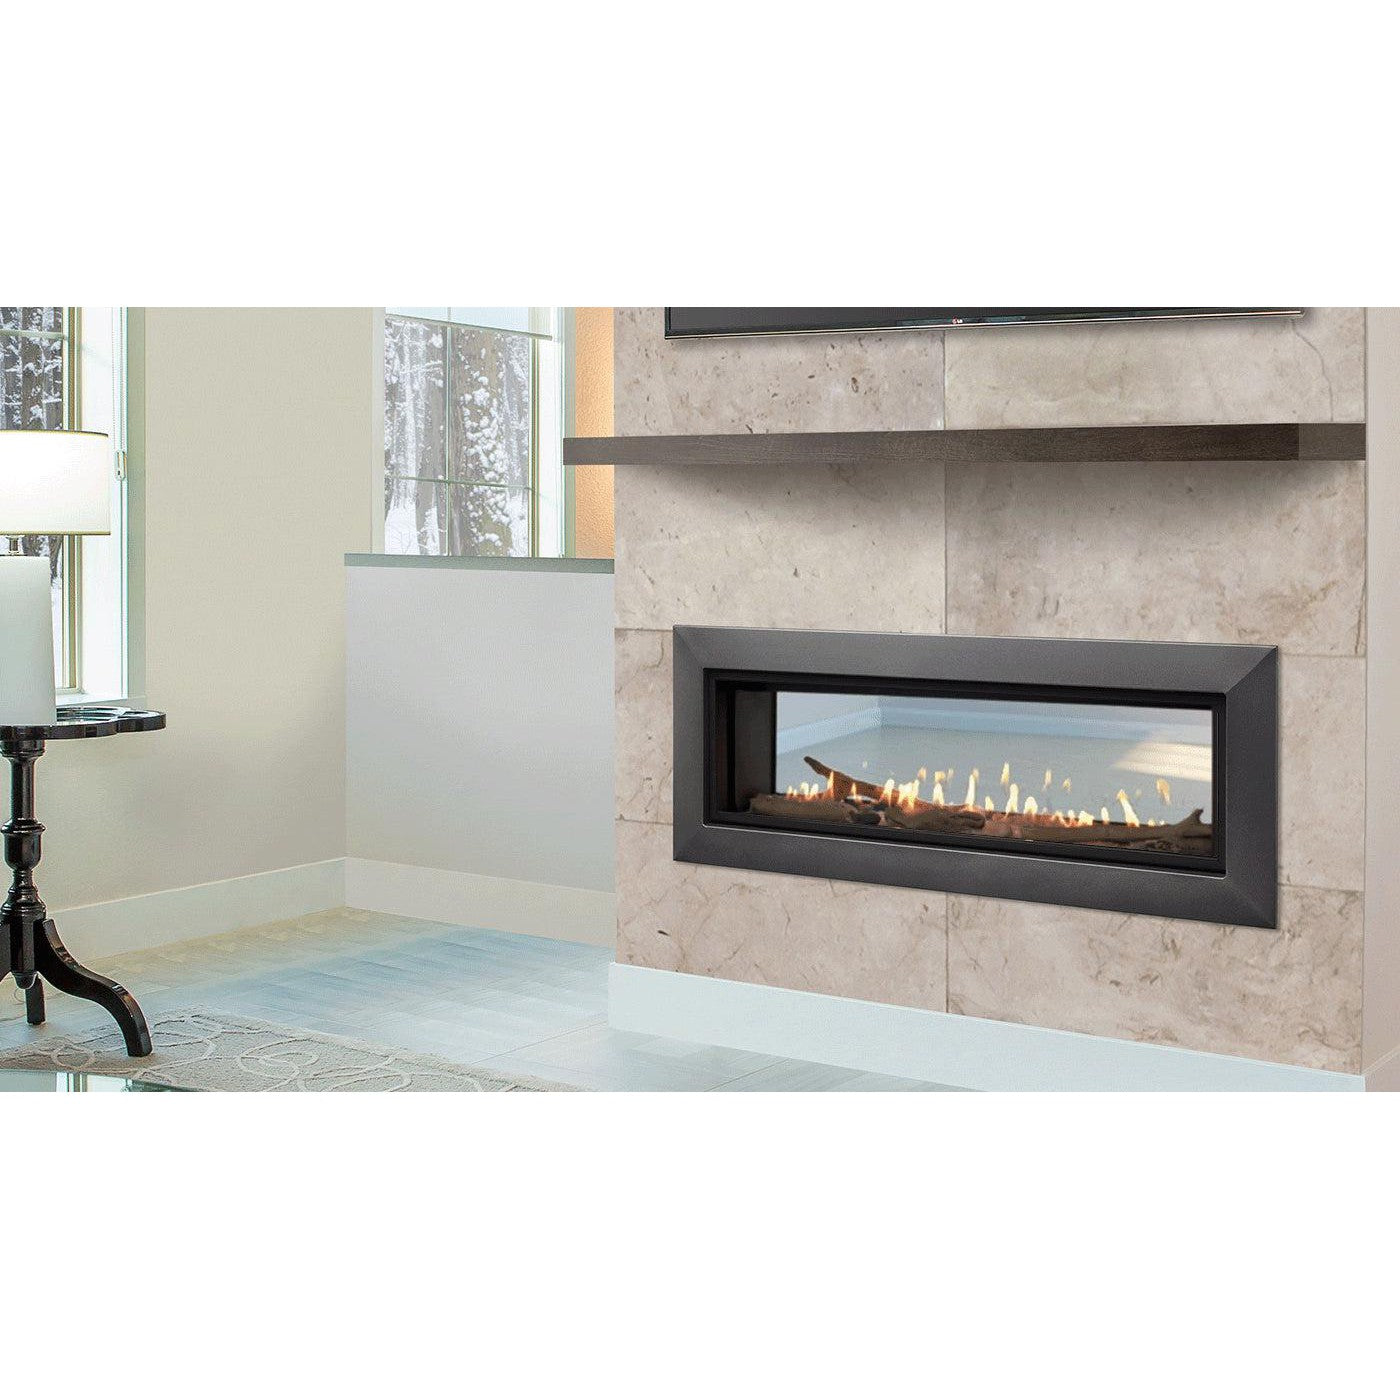 Majestic Echelon II See-Through 48" Linear Contemporary Direct Vent Natural Gas Fireplace With IntelliFire Touch Ignition System